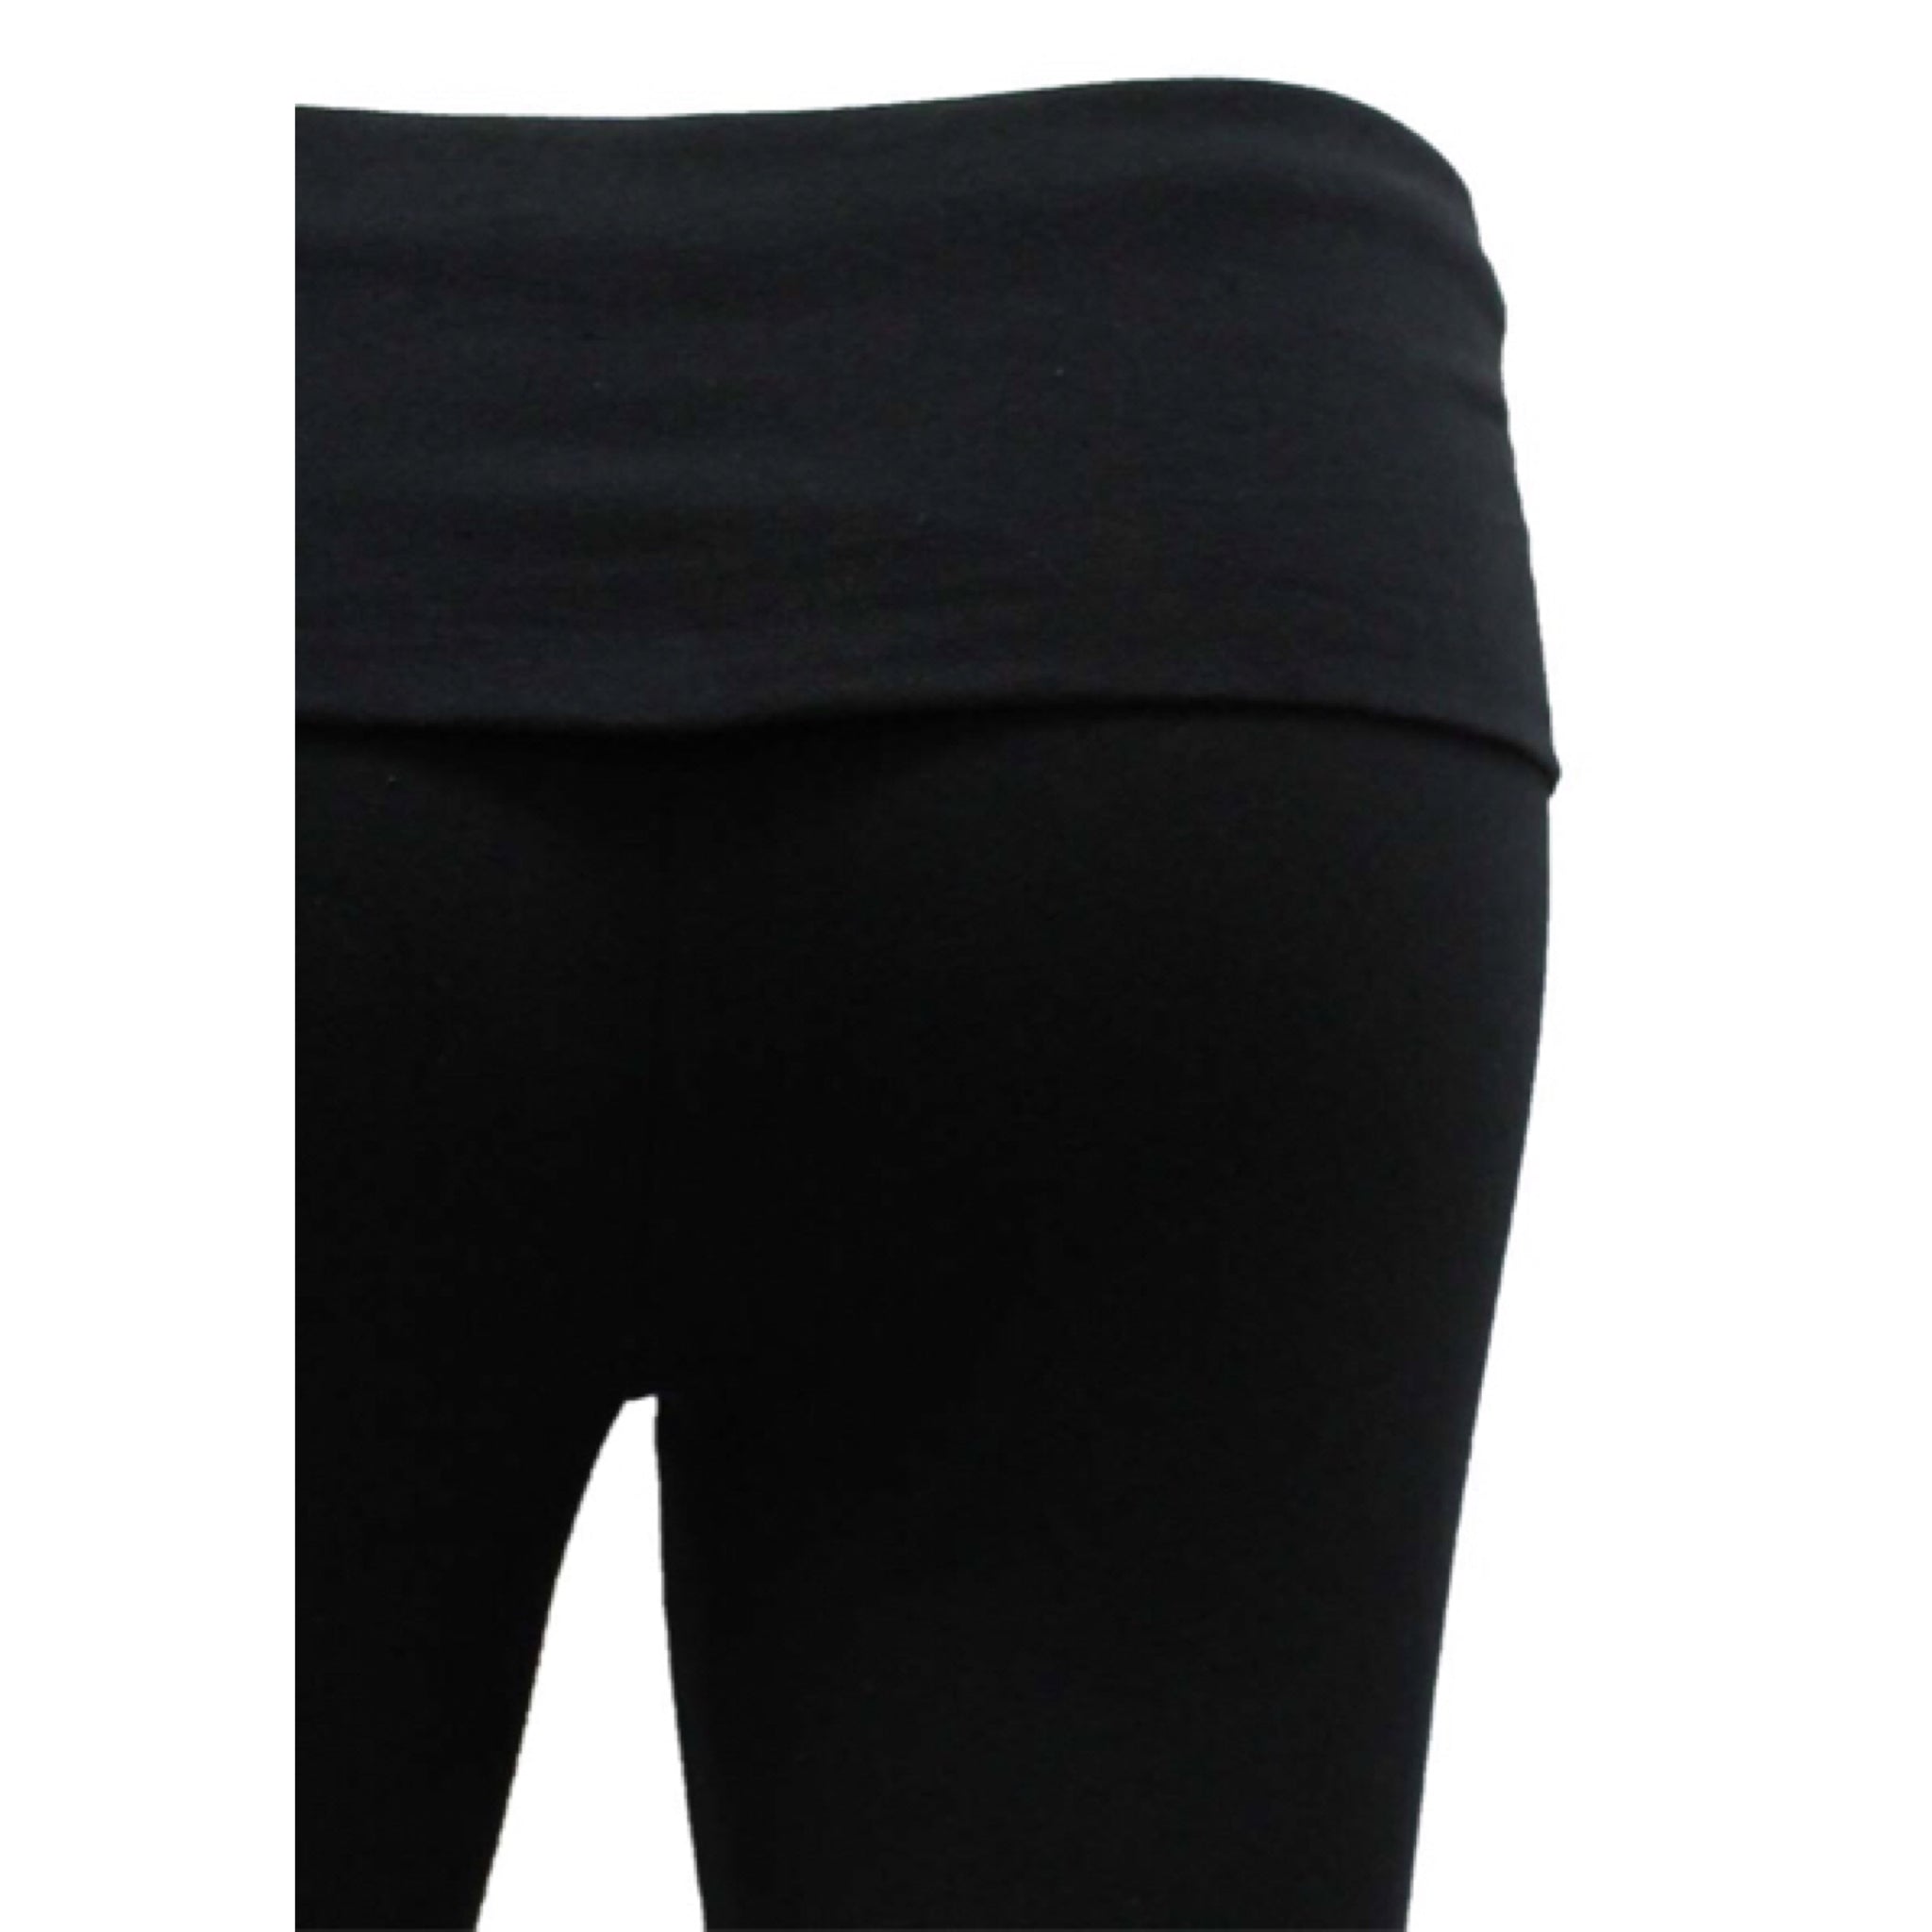 “Head Over Heels” Low Rise Leggings Stretch Yoga Lounge Fold Over Pants Gym Workout Black